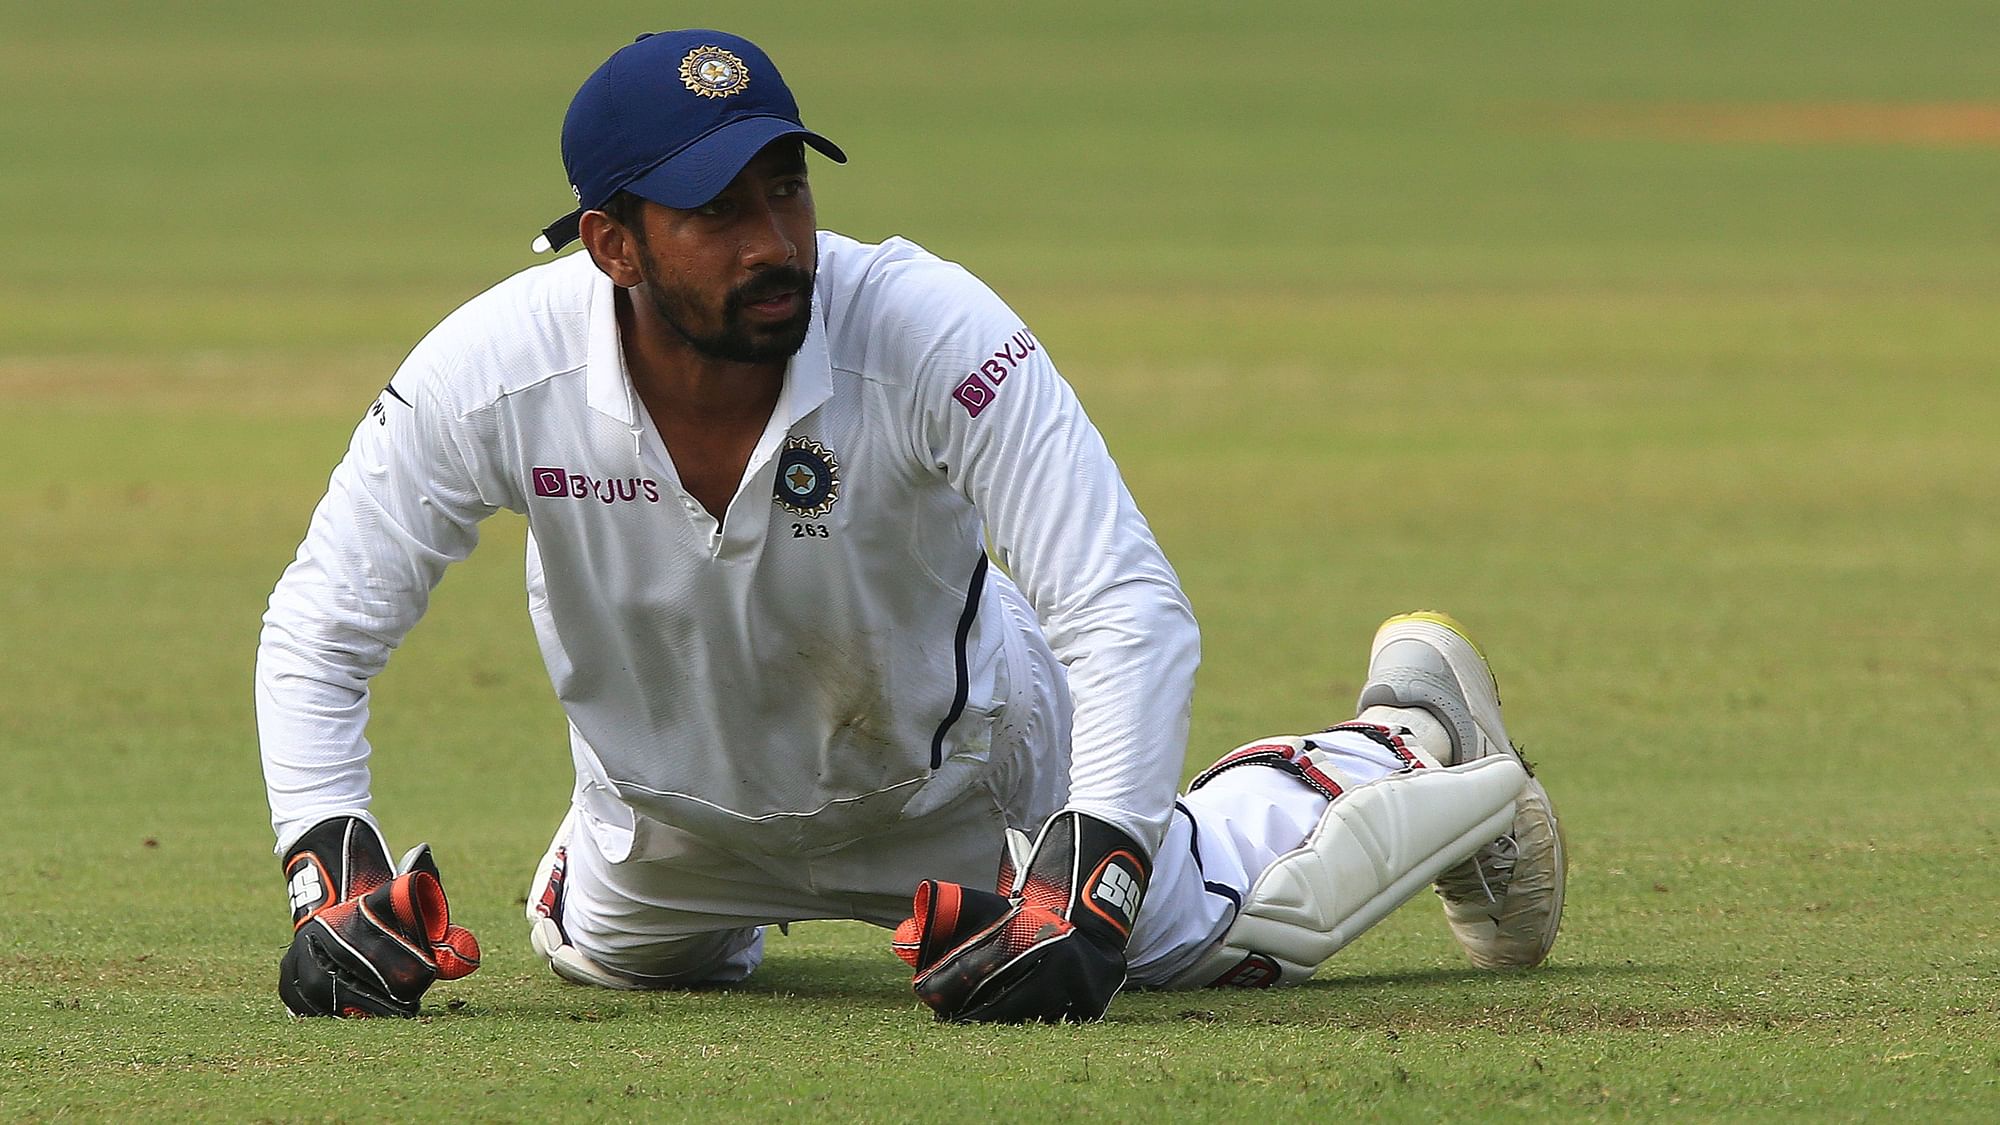 Fans were all praise for wicketkeeper Wriddhiman Saha’s brilliant glovework behind the stumps.